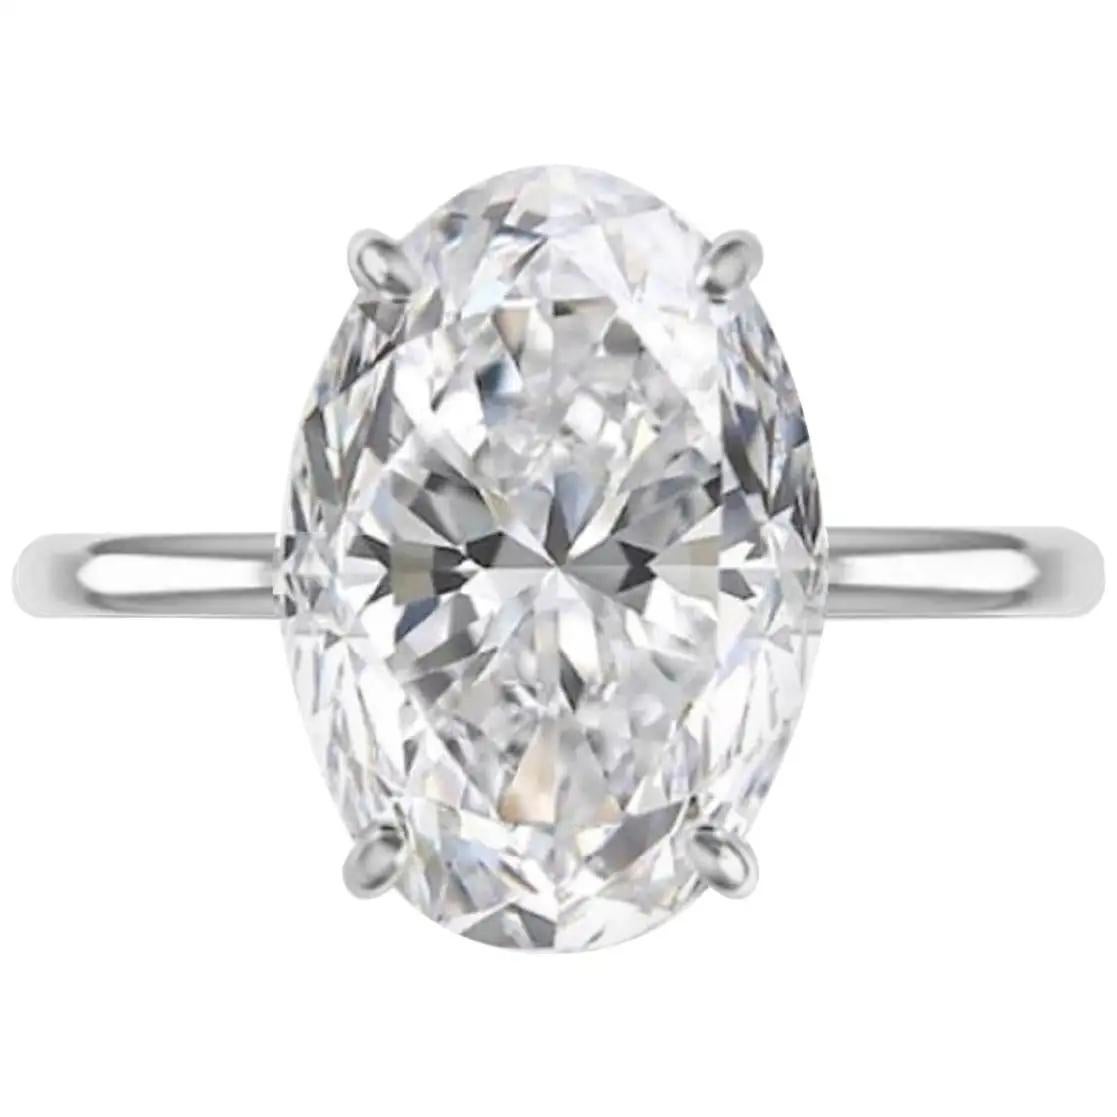  3 Carat exquisite oval-shaped diamond ring that epitomizes timeless elegance and unparalleled beauty. Crafted to perfection, this stunning piece boasts exceptional luster, accentuated by its excellent cut and polish.

With a remarkable ratio of